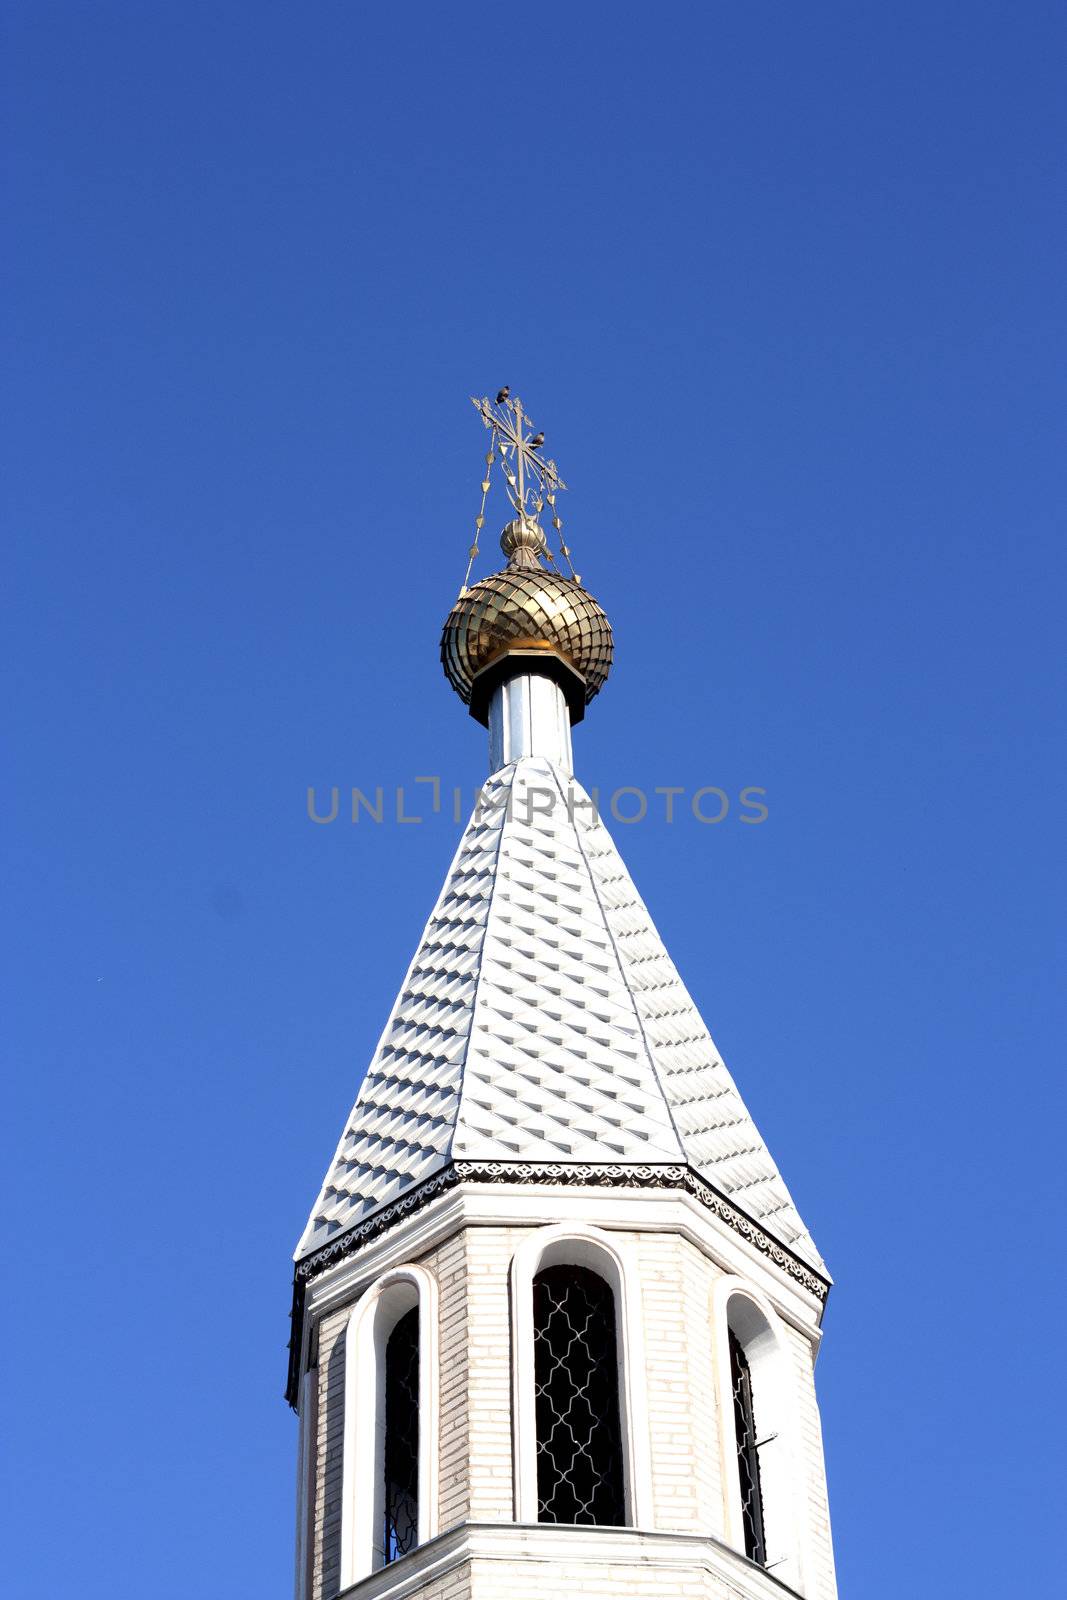 Golden dome of the Orthodox church in Central Russia on the blue sky background partially covered with snow. 